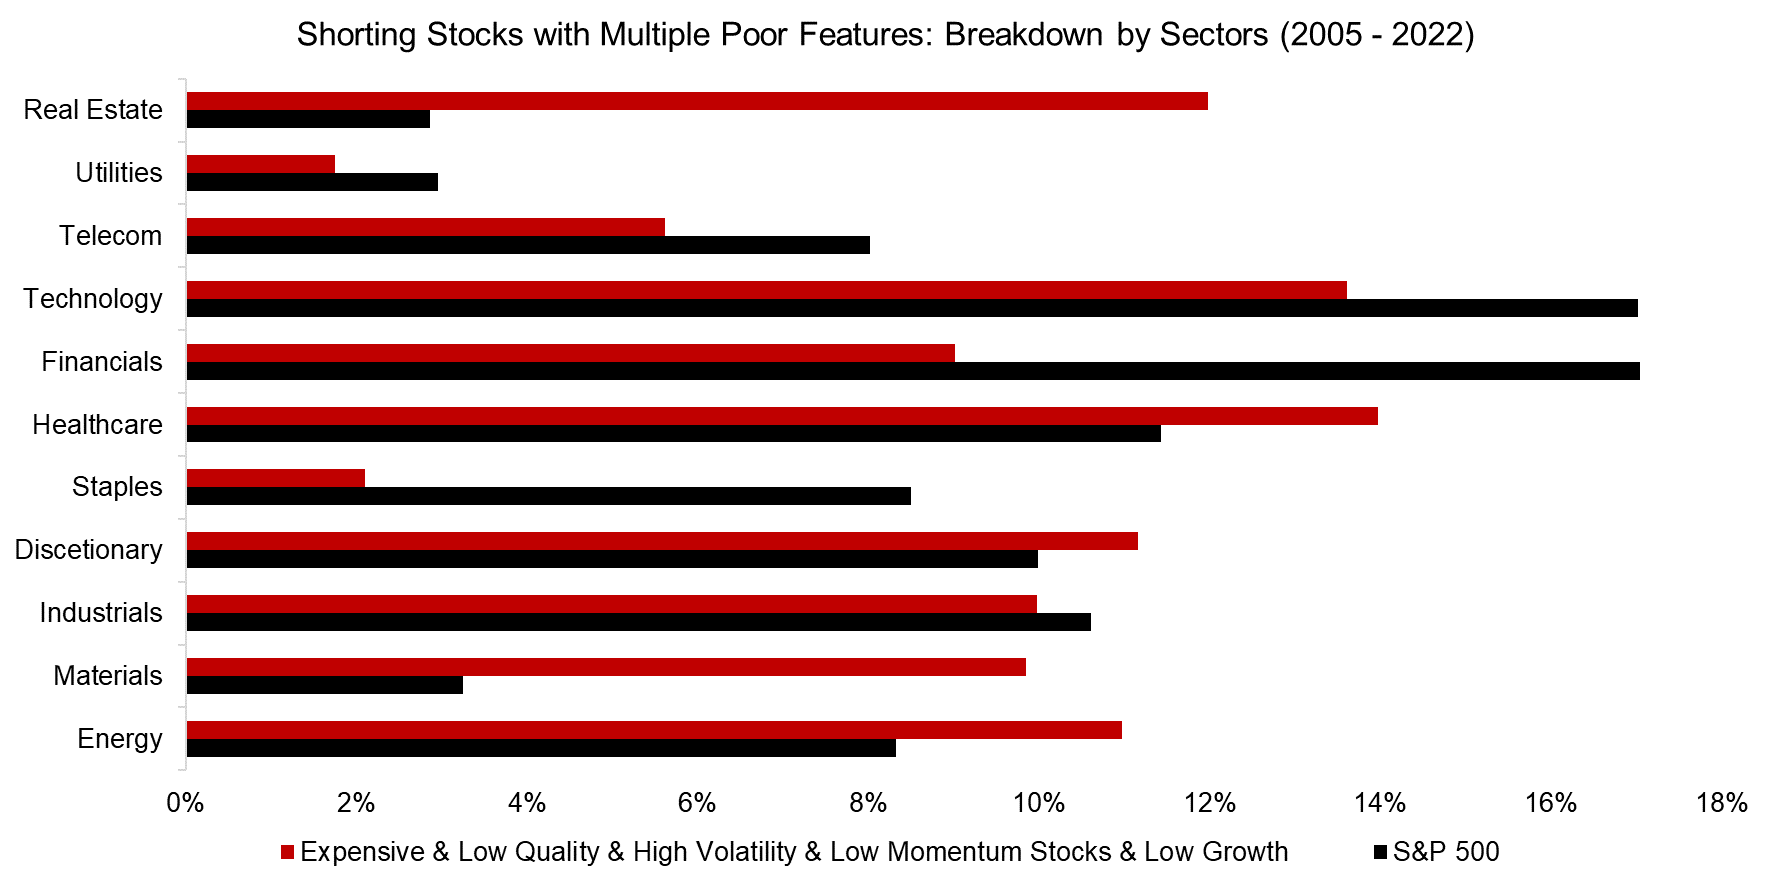 Shorting Stocks with Multiple Poor Features Breakdown by Sectors (2005 - 2022)